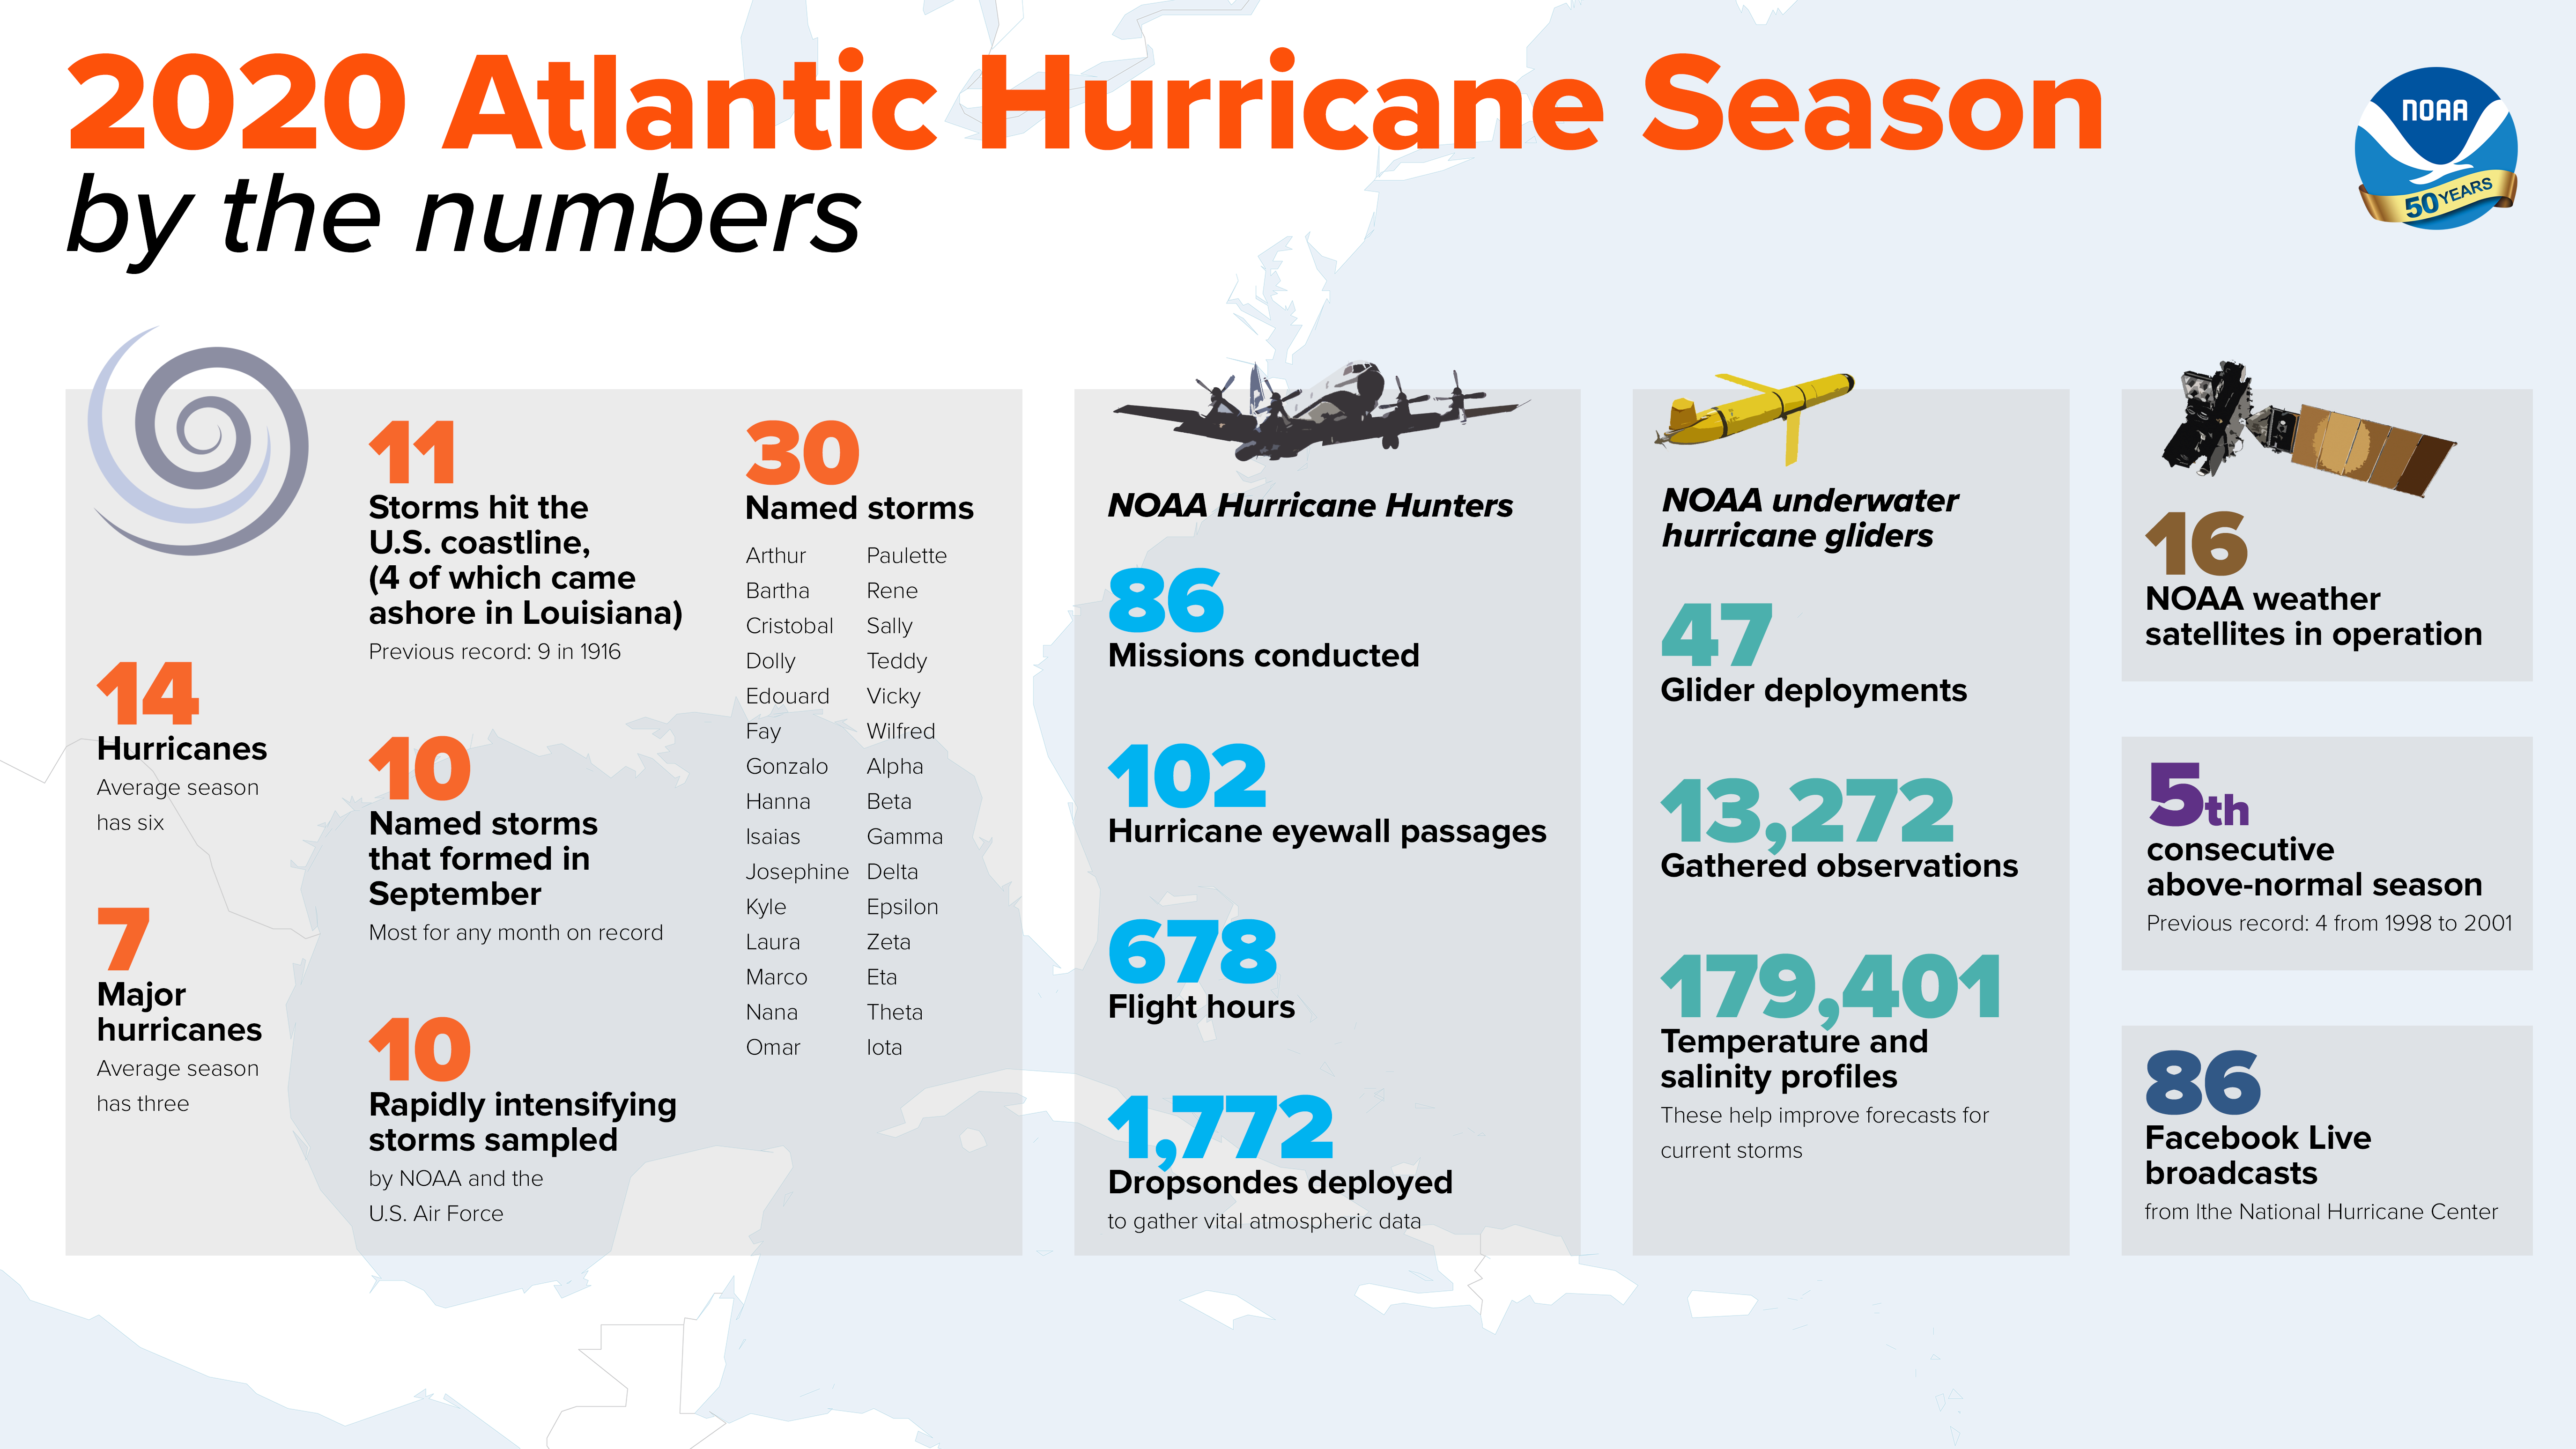 This infographic highlights key facts and statistics from the 2020 Atlantic Hurricane Season (Updated on June 10, 2021). The Atlantic hurricane season officially ends November 30, but storm activity in the tropics can sometimes continue beyond that date.